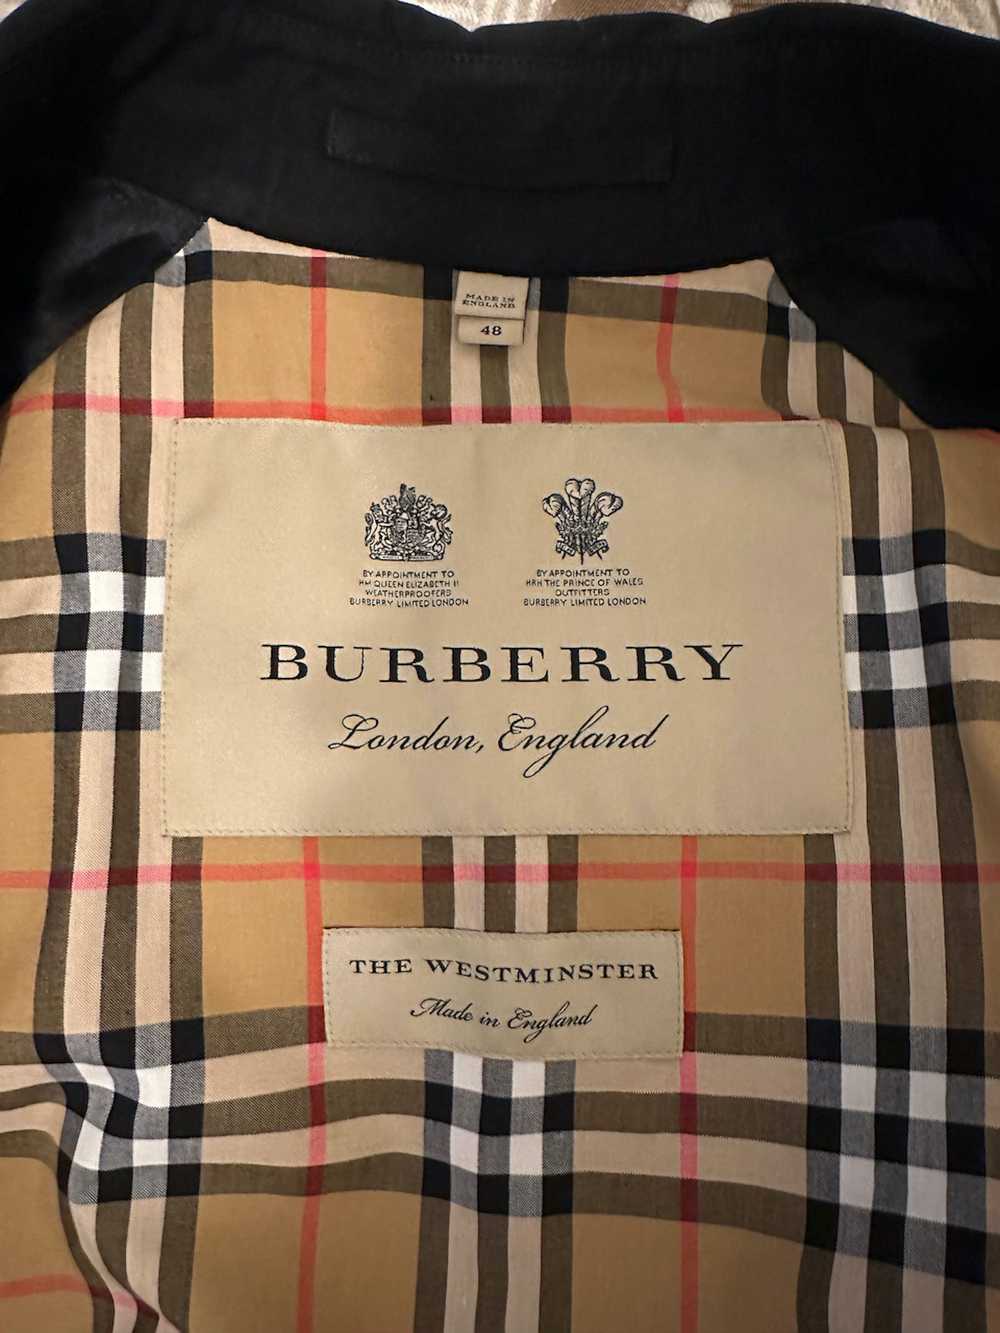 Burberry Burberry Westminster Heritage Trench Coat - image 2